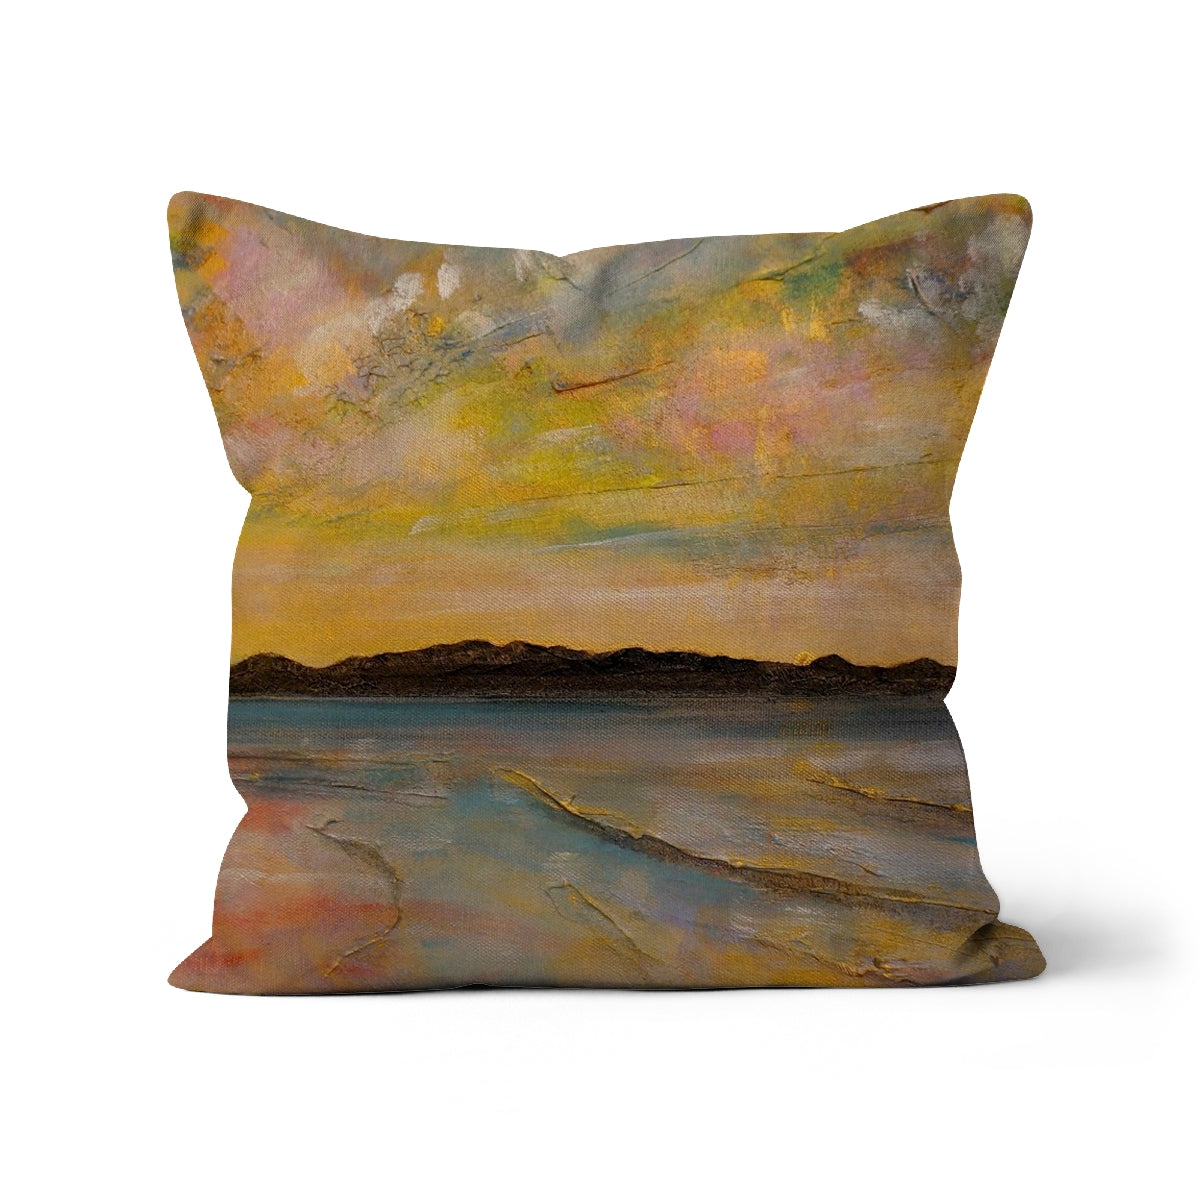 Vallay Island North Uist Art Gifts Cushion-Cushions-Hebridean Islands Art Gallery-Canvas-22"x22"-Paintings, Prints, Homeware, Art Gifts From Scotland By Scottish Artist Kevin Hunter